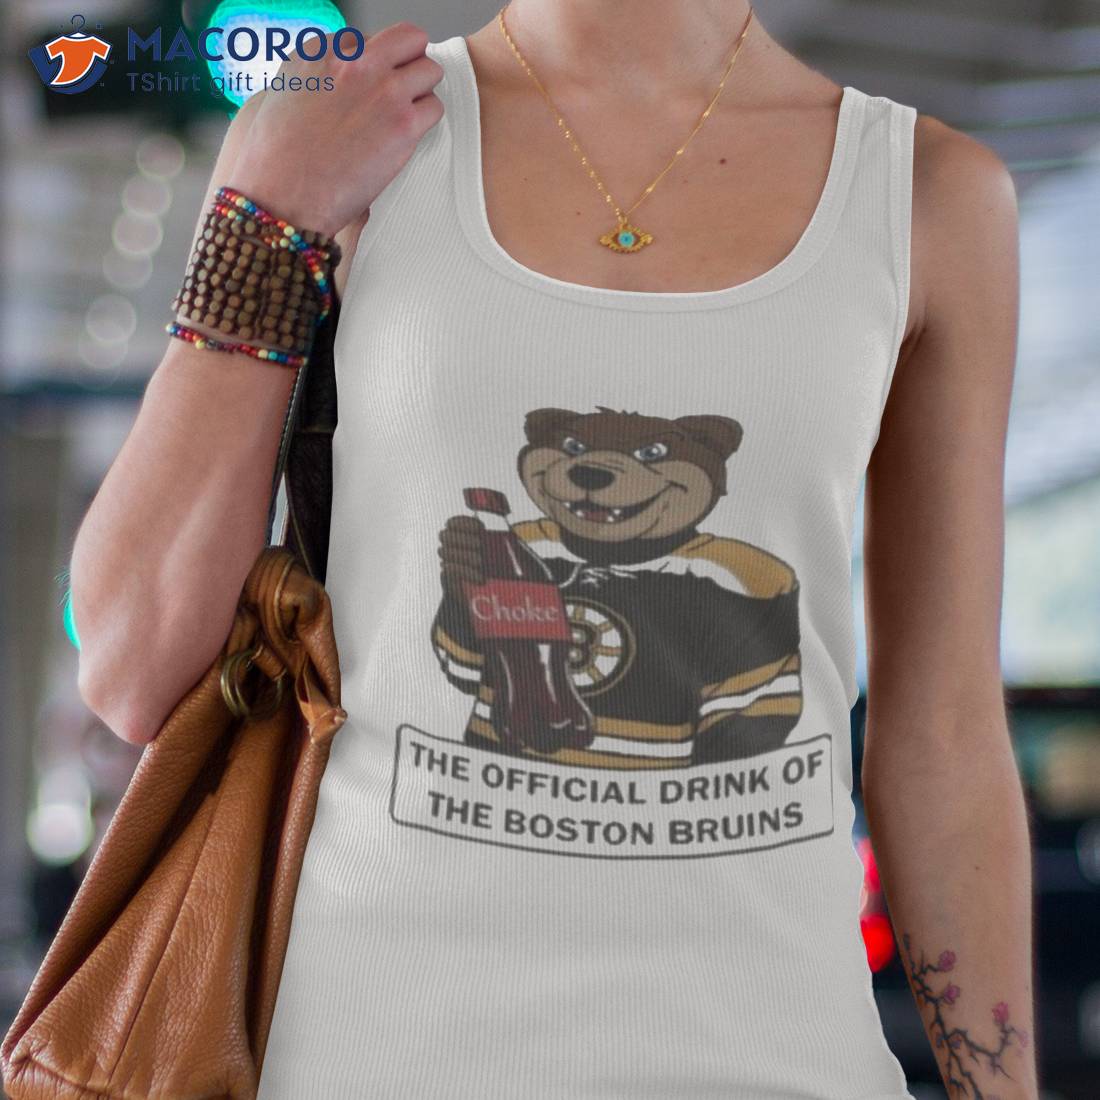 Blades The Bruin The Drink Of The Boston Bruins Shirt